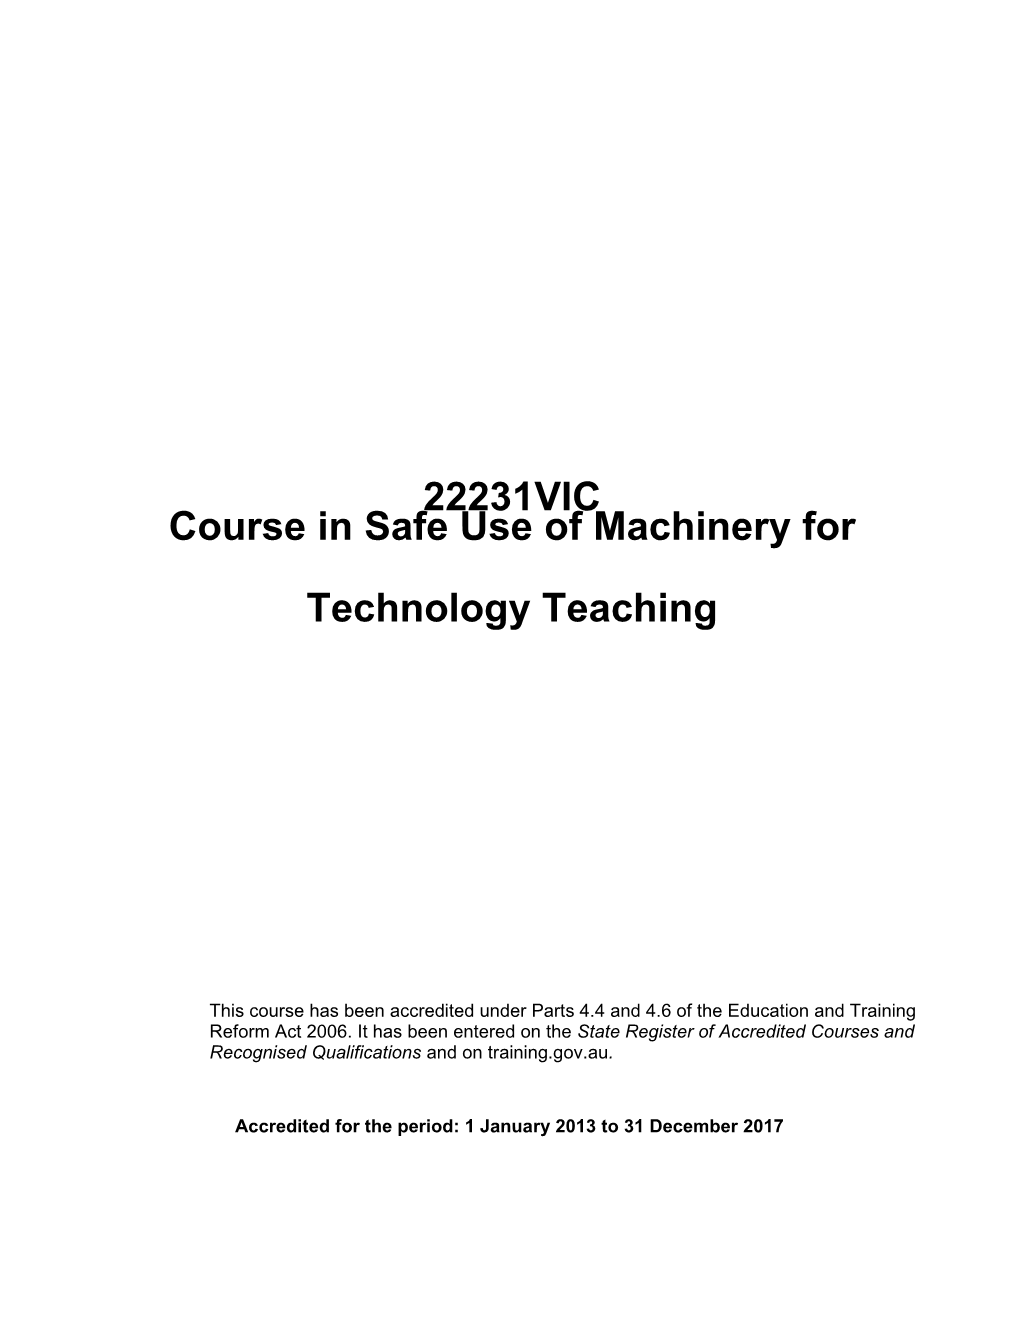 Course in Safe Use of Machinery for Technology Teaching 22231VIC